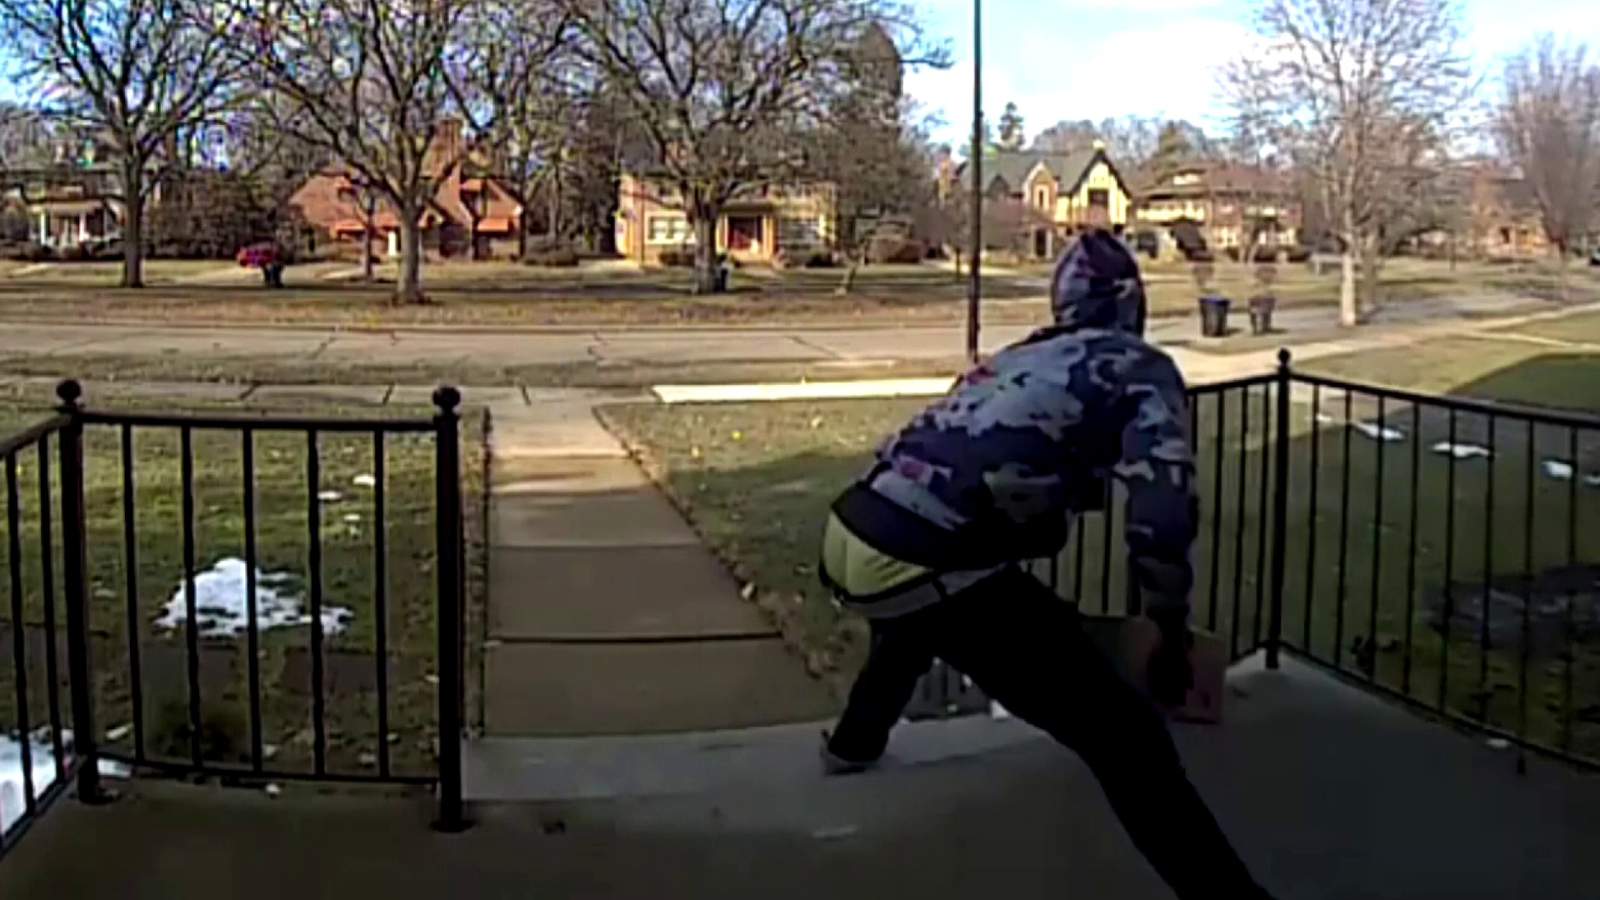 WATCH: Detroit police seek person who snatched package from porch